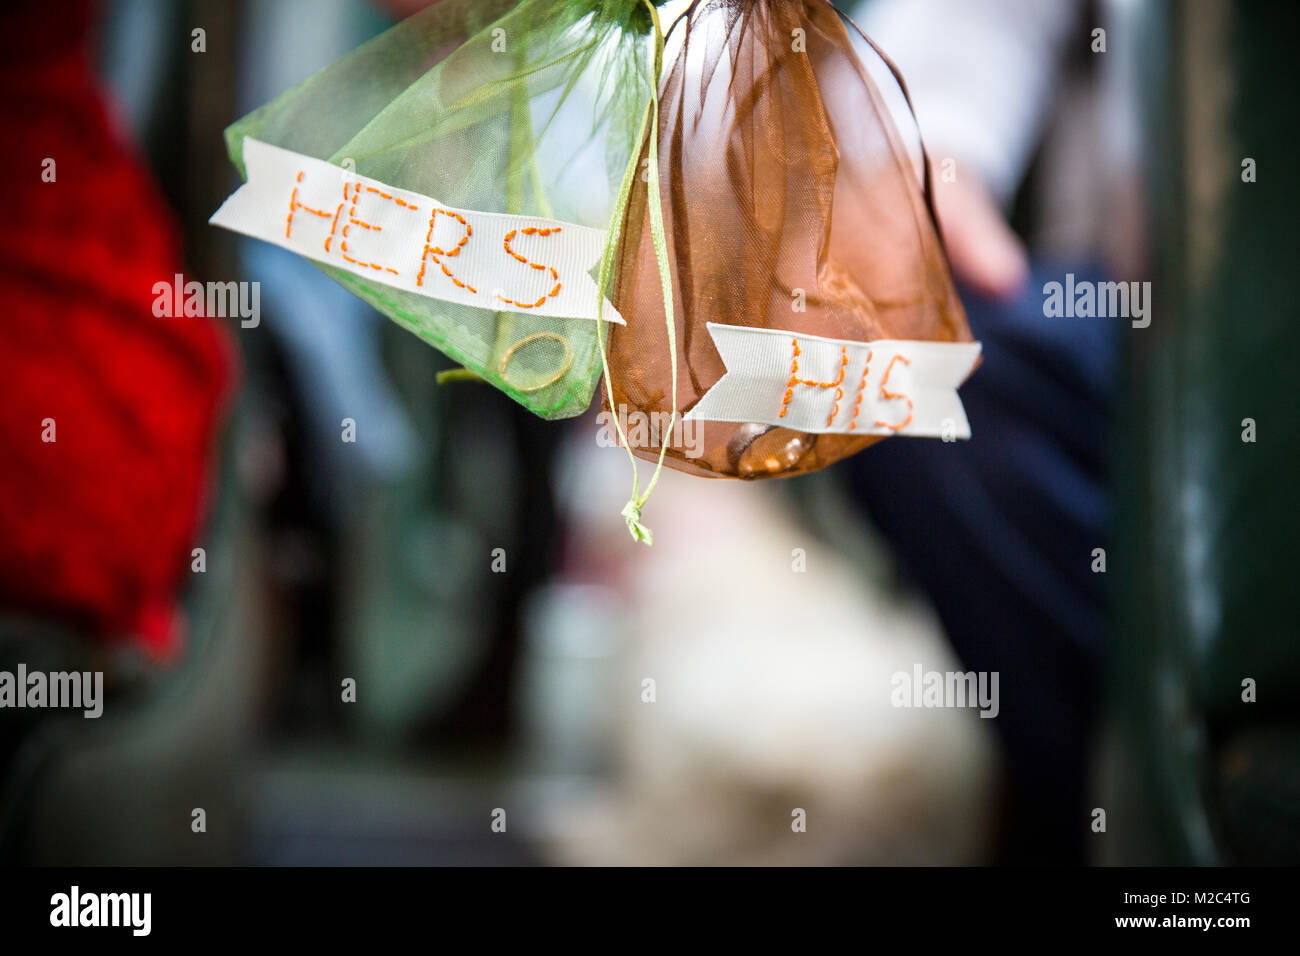 Two voile bags, containing wedding rings, with hand-stitched his and hers labels, close-up Stock Photo